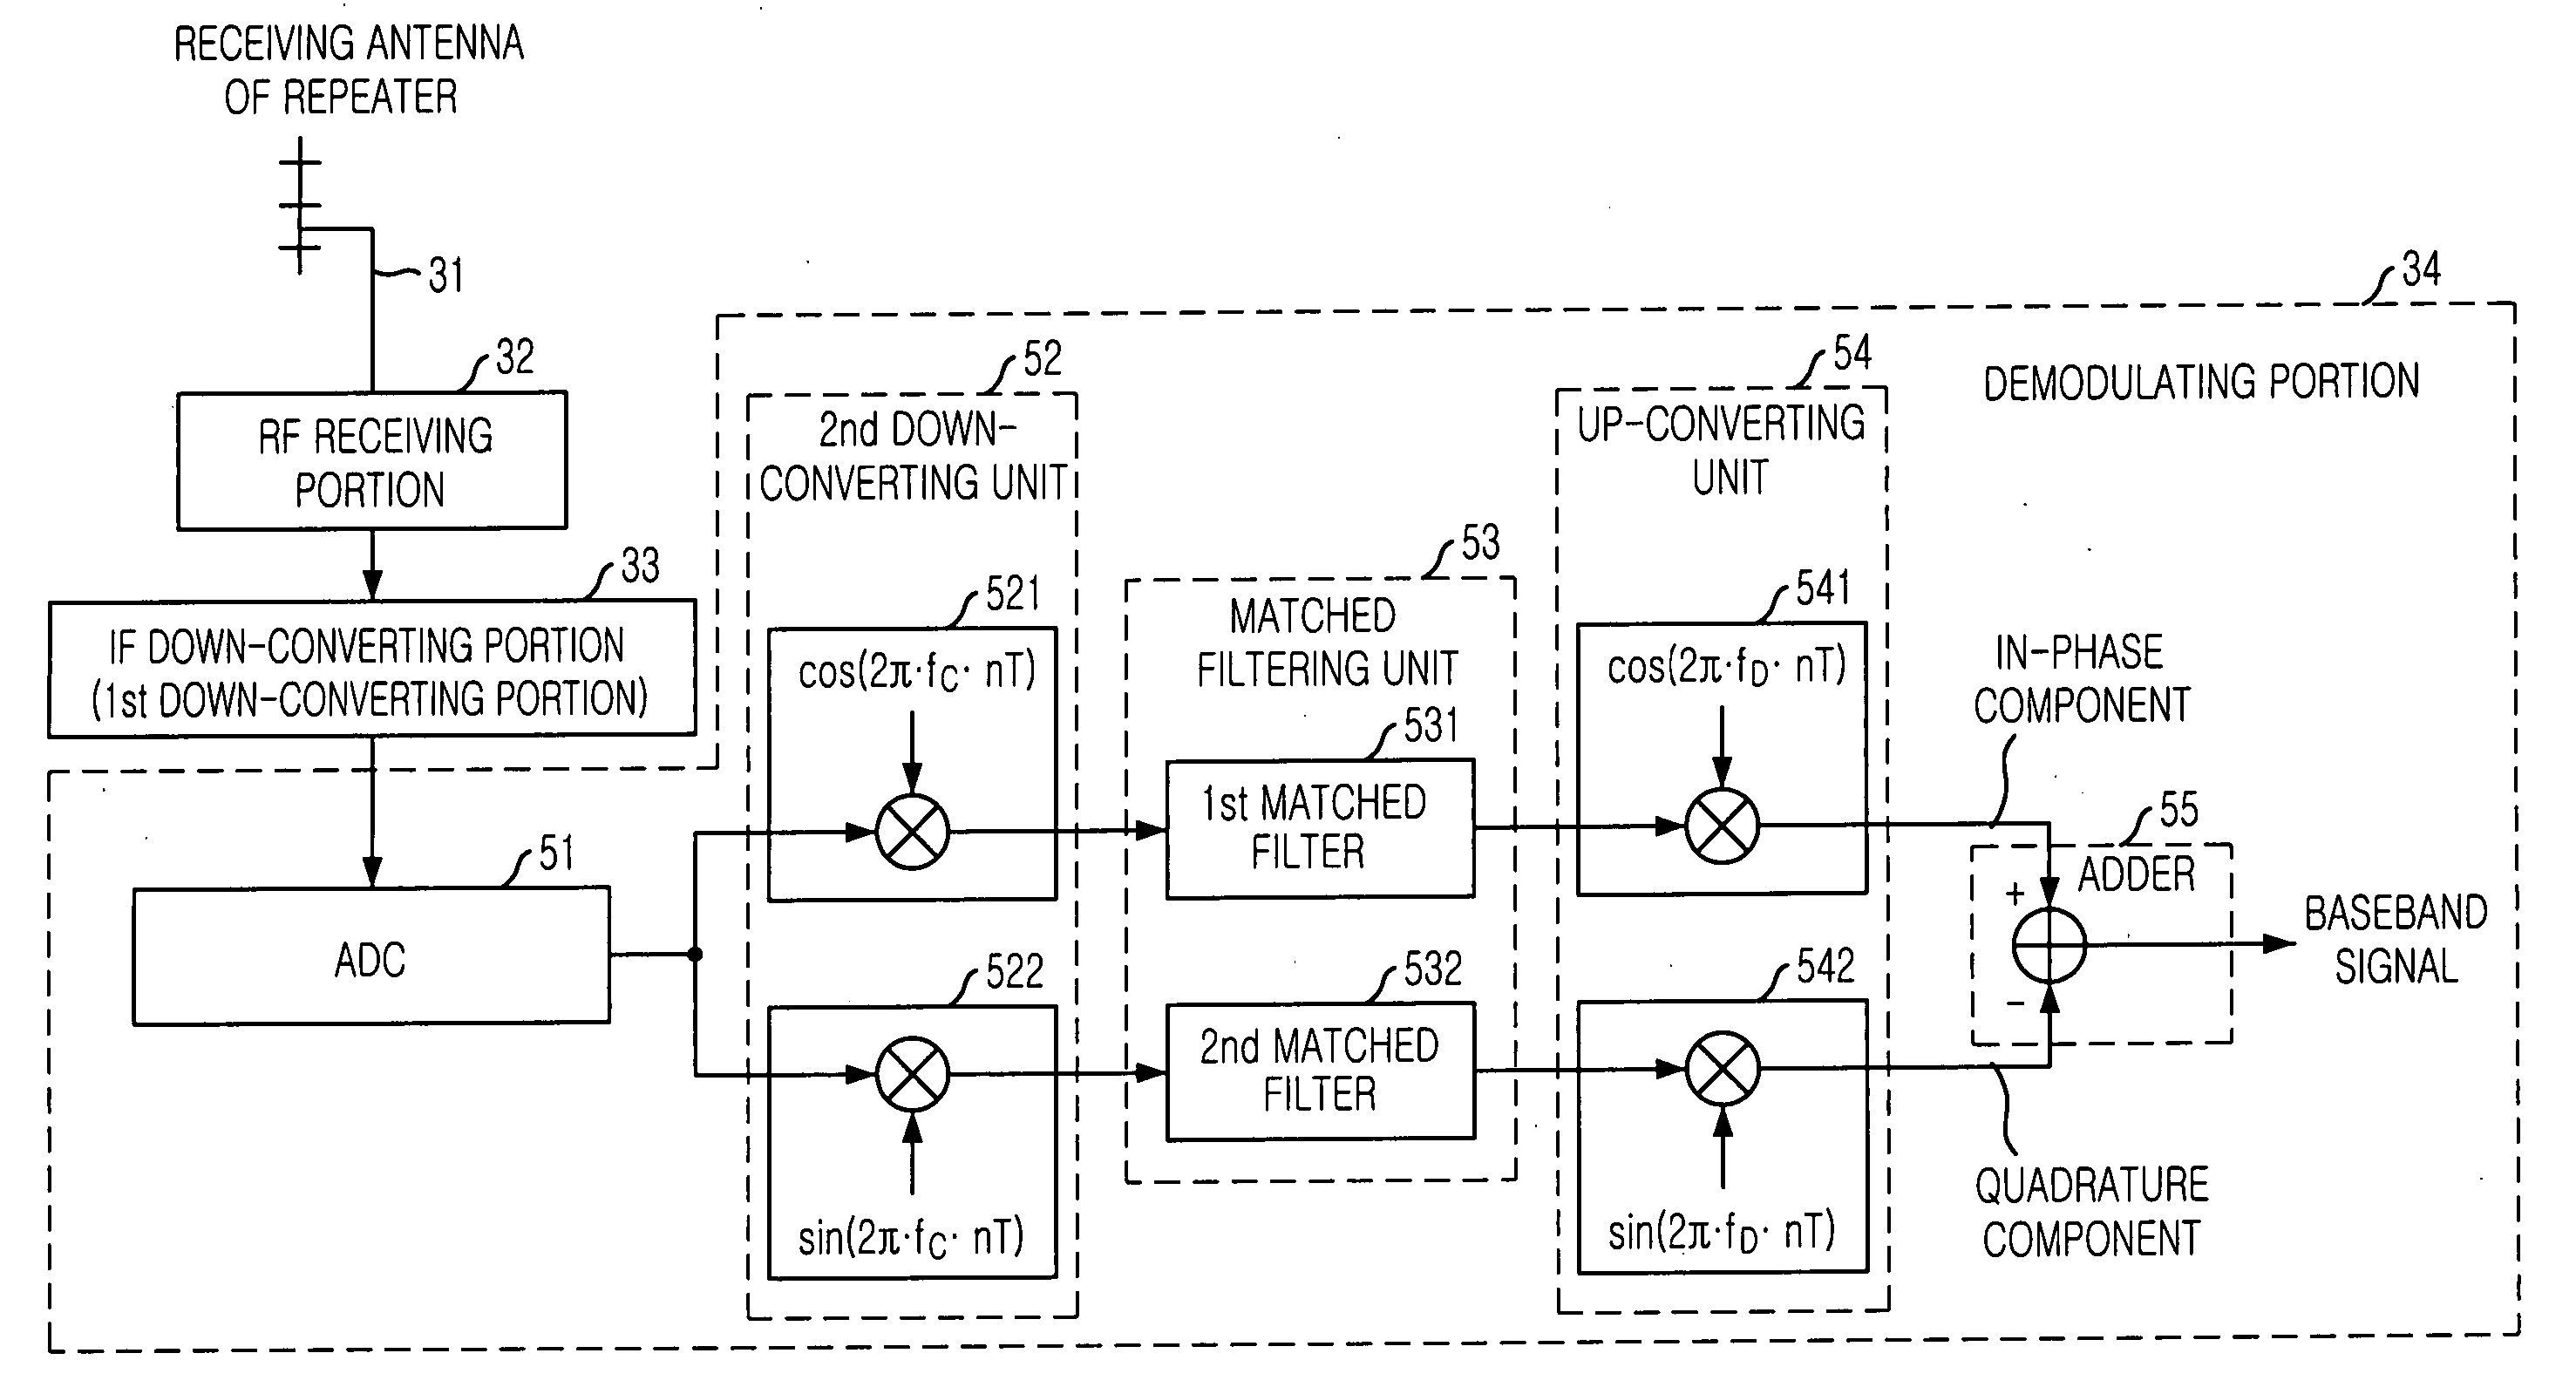 Demodulation apparatus and method for reducing time delay of on-channel repeater in terrestrial digital TV broadcasting system